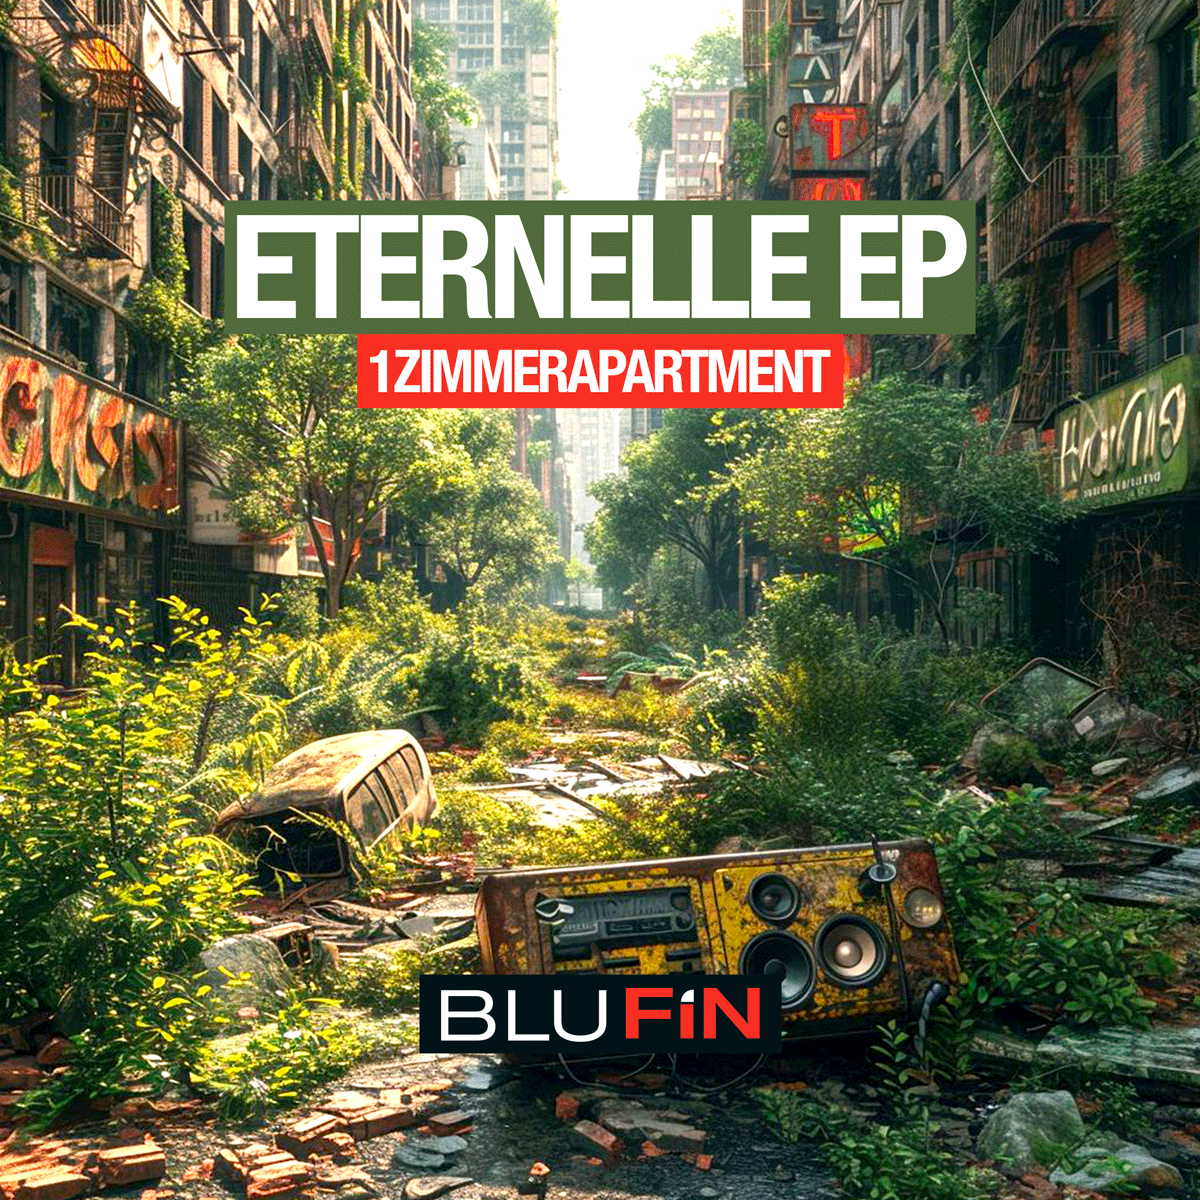 “Eternelle EP” is the new output by 1zimmerapartment on BluFin Records